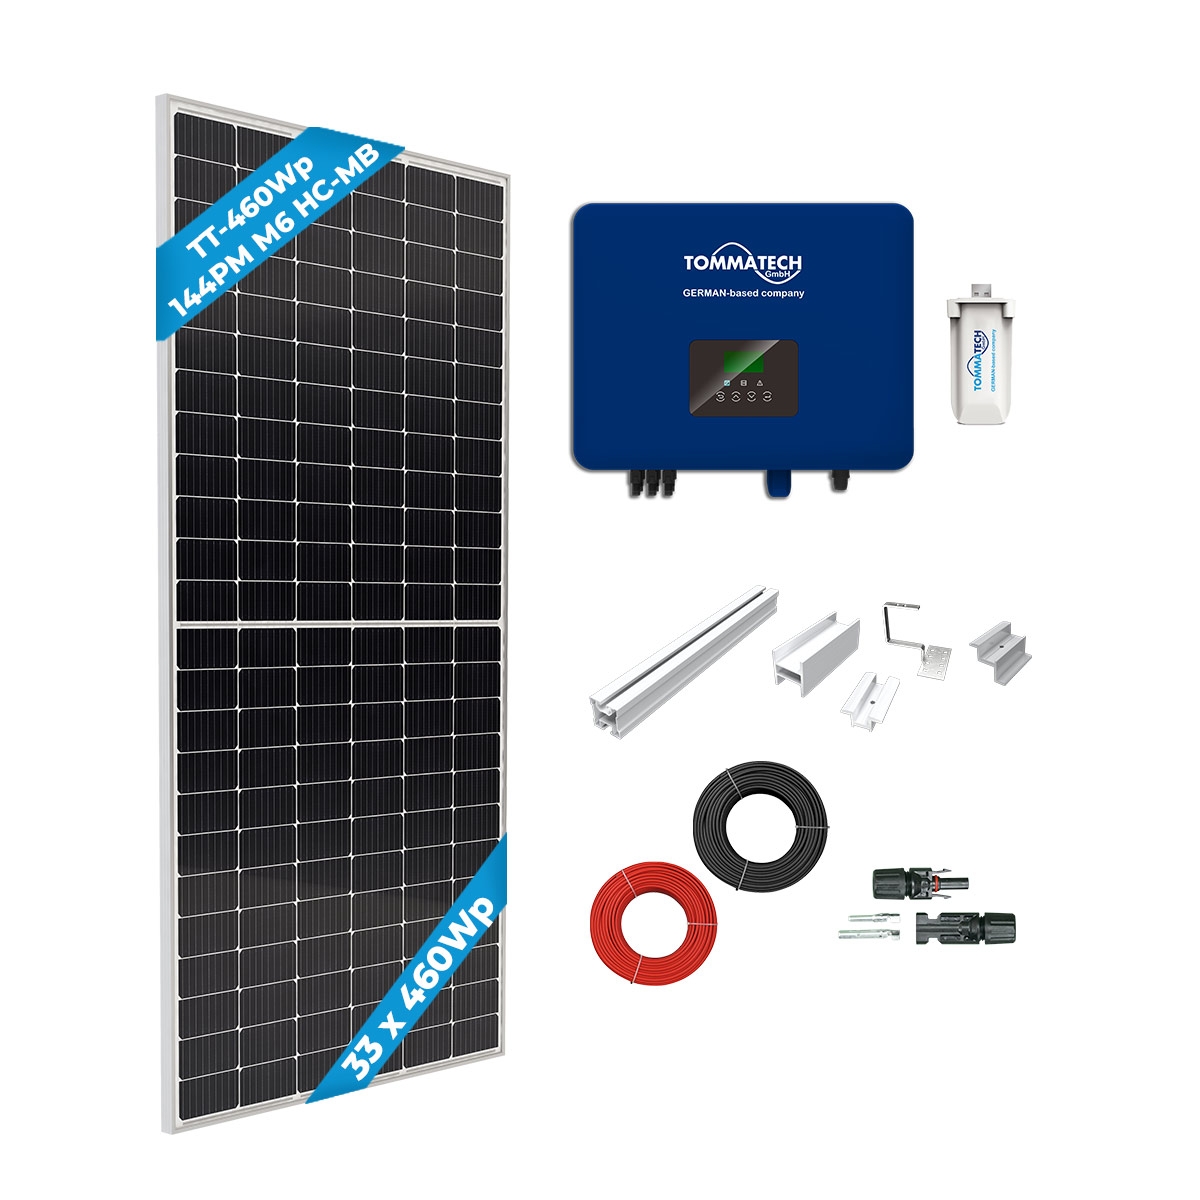 TommaTech 15kWe Tile Roof Three Phase On-Grid Solar Package